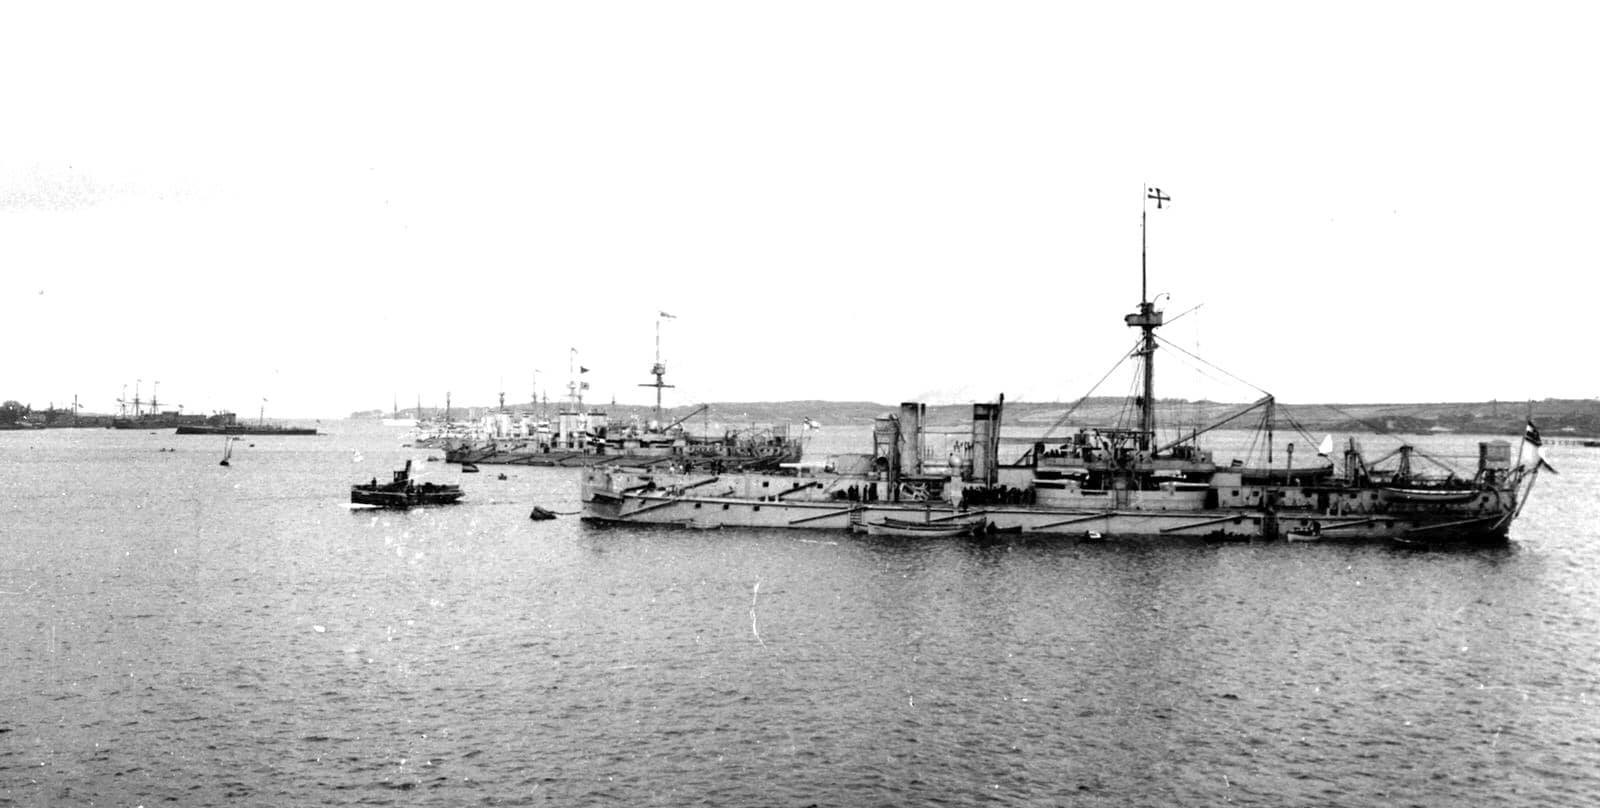 Ships of the German Battle Fleet at anchor in Kiel Harbor in 1896-  In the foreground, the 4 Sachsen-class ironclads  the center background, the two funnel, three mast modernized battleship  KW.jpg